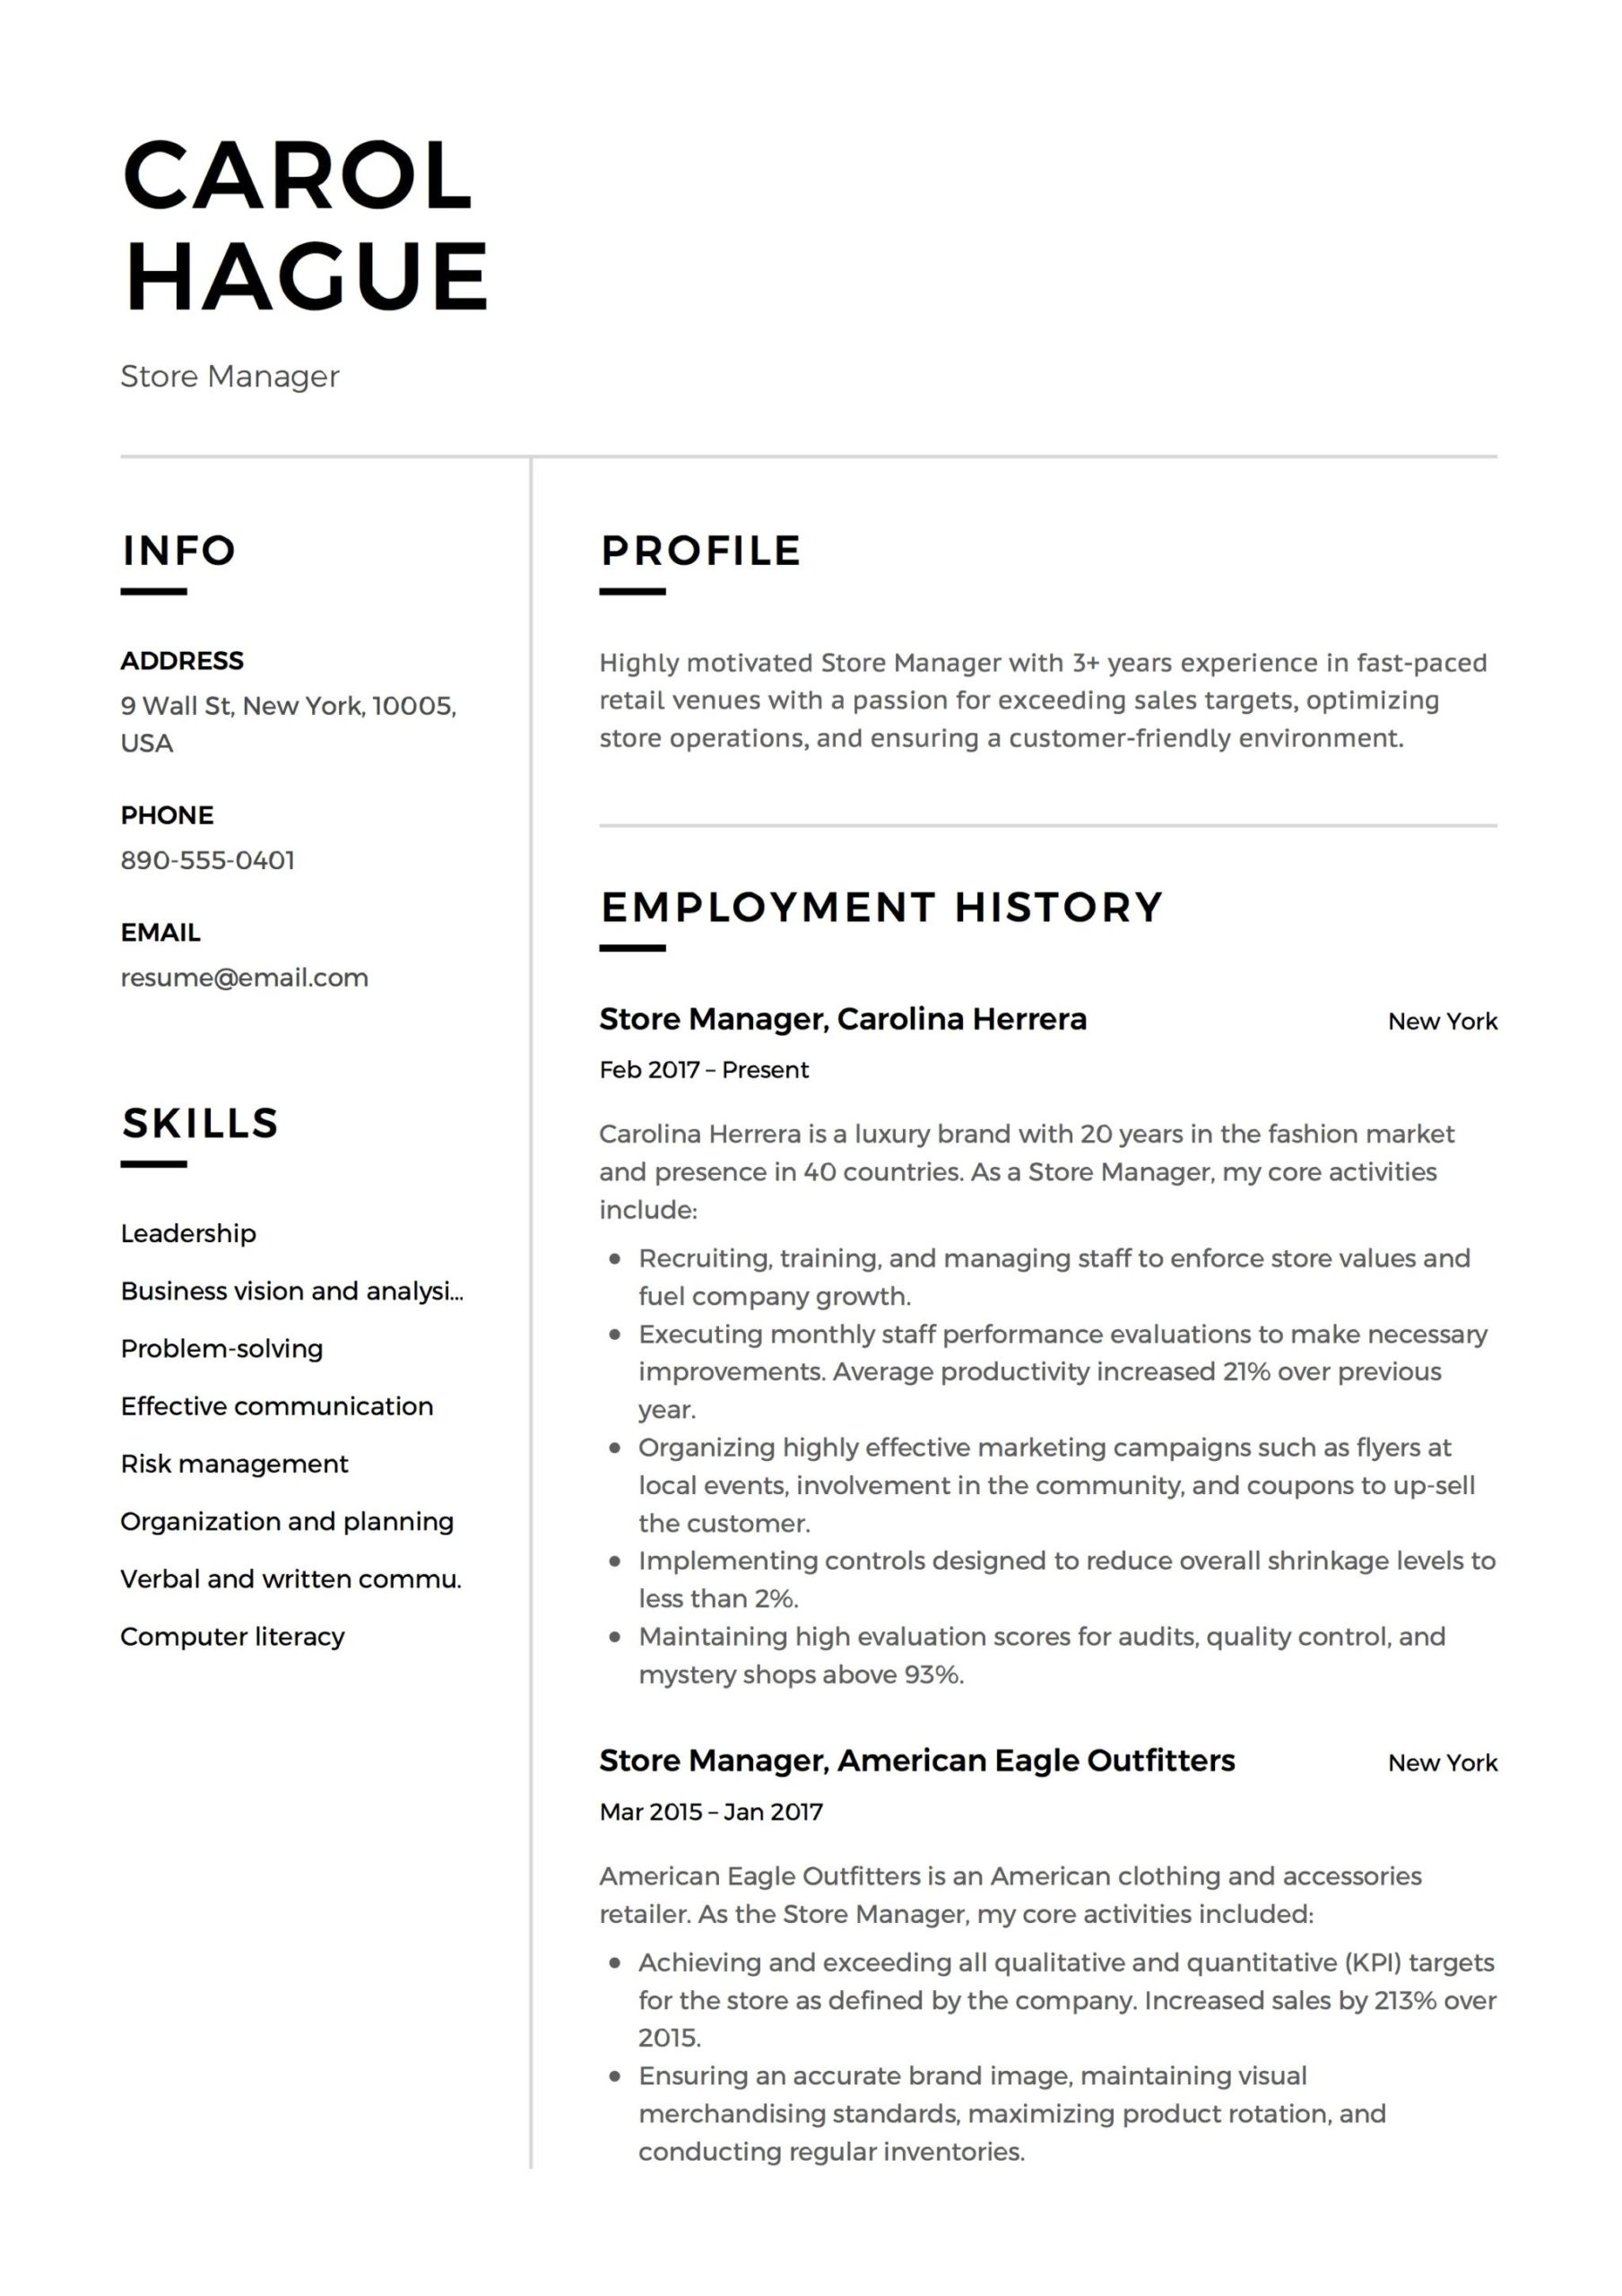 Sample Resume with Retail Sales Experience Retail Resume Examples 2022 Free Downloads Pdfs